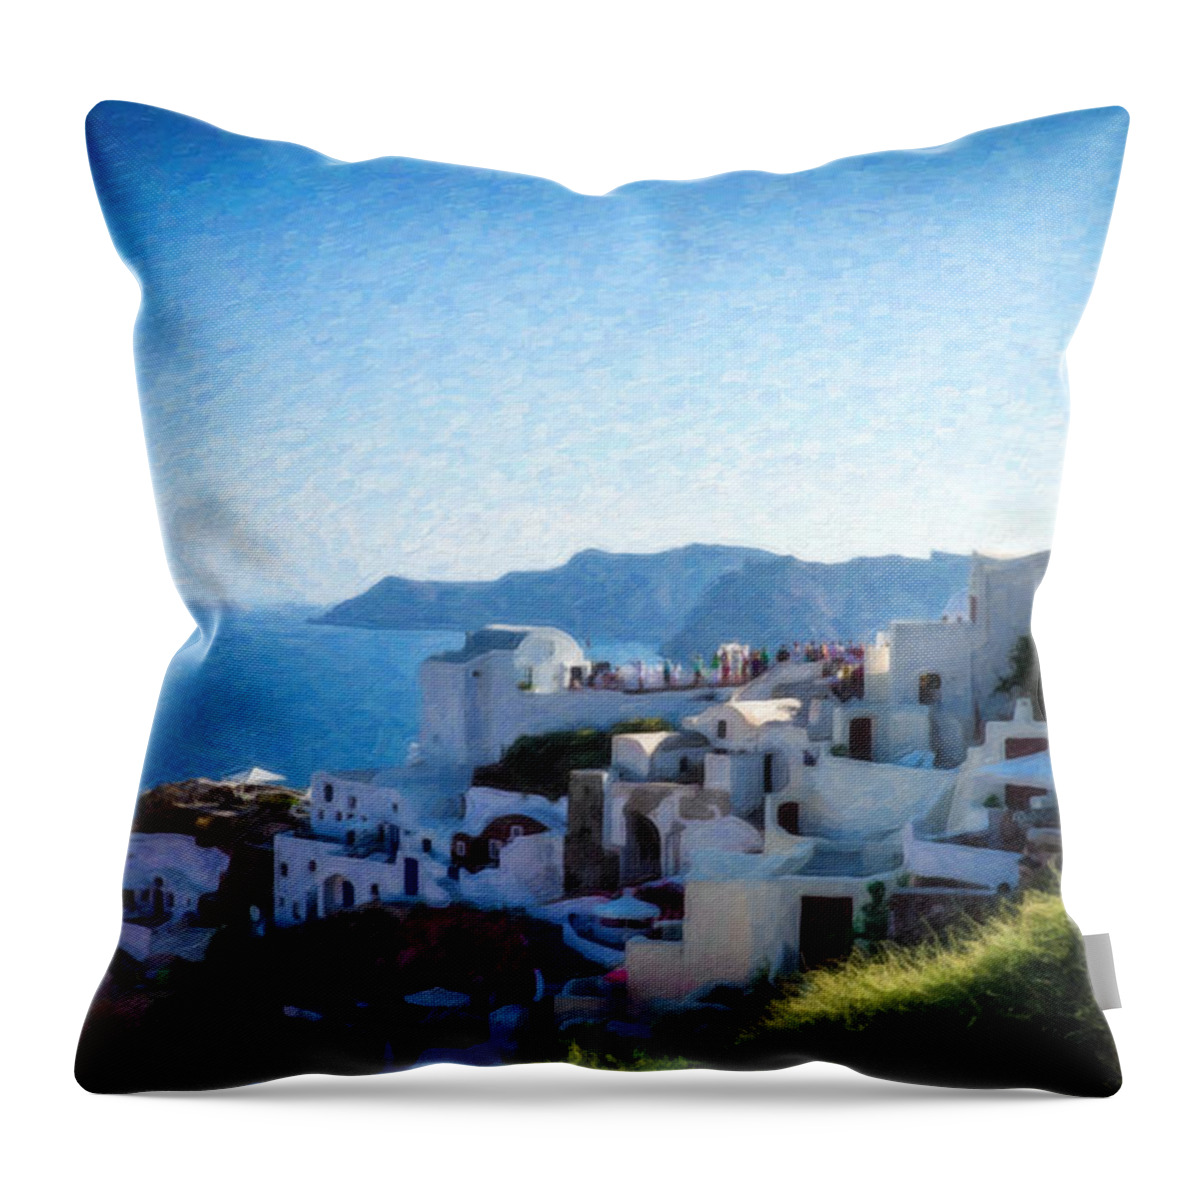 Landscape Throw Pillow featuring the painting Oia Santorini Grk4332 by Dean Wittle